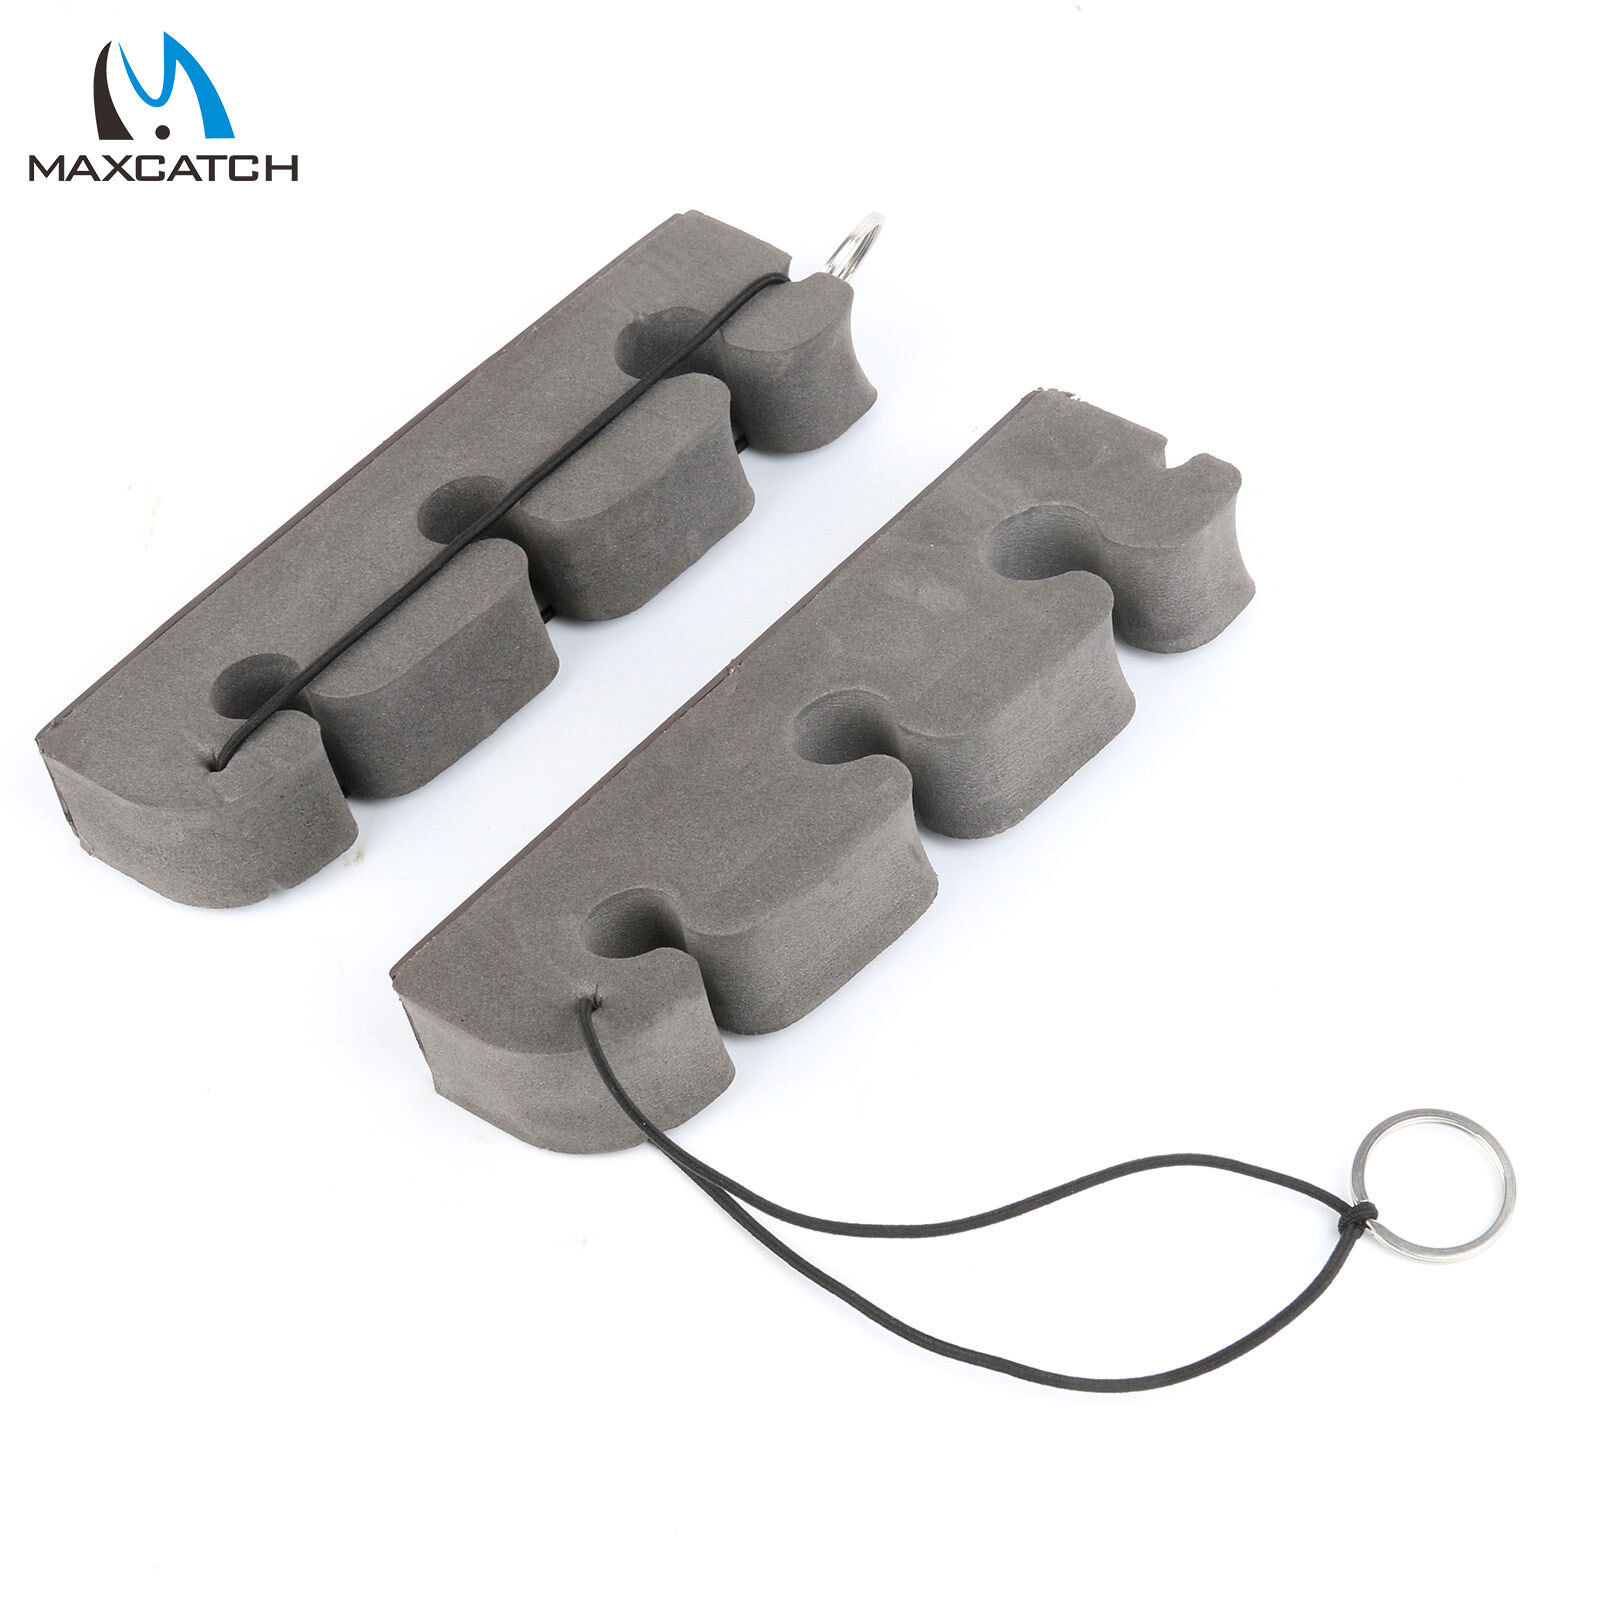 Maxcatch 2 pcs Portable Fly Fishing Rod Rack Holder Rod Stand High Density Foam Maxcatch does not apply